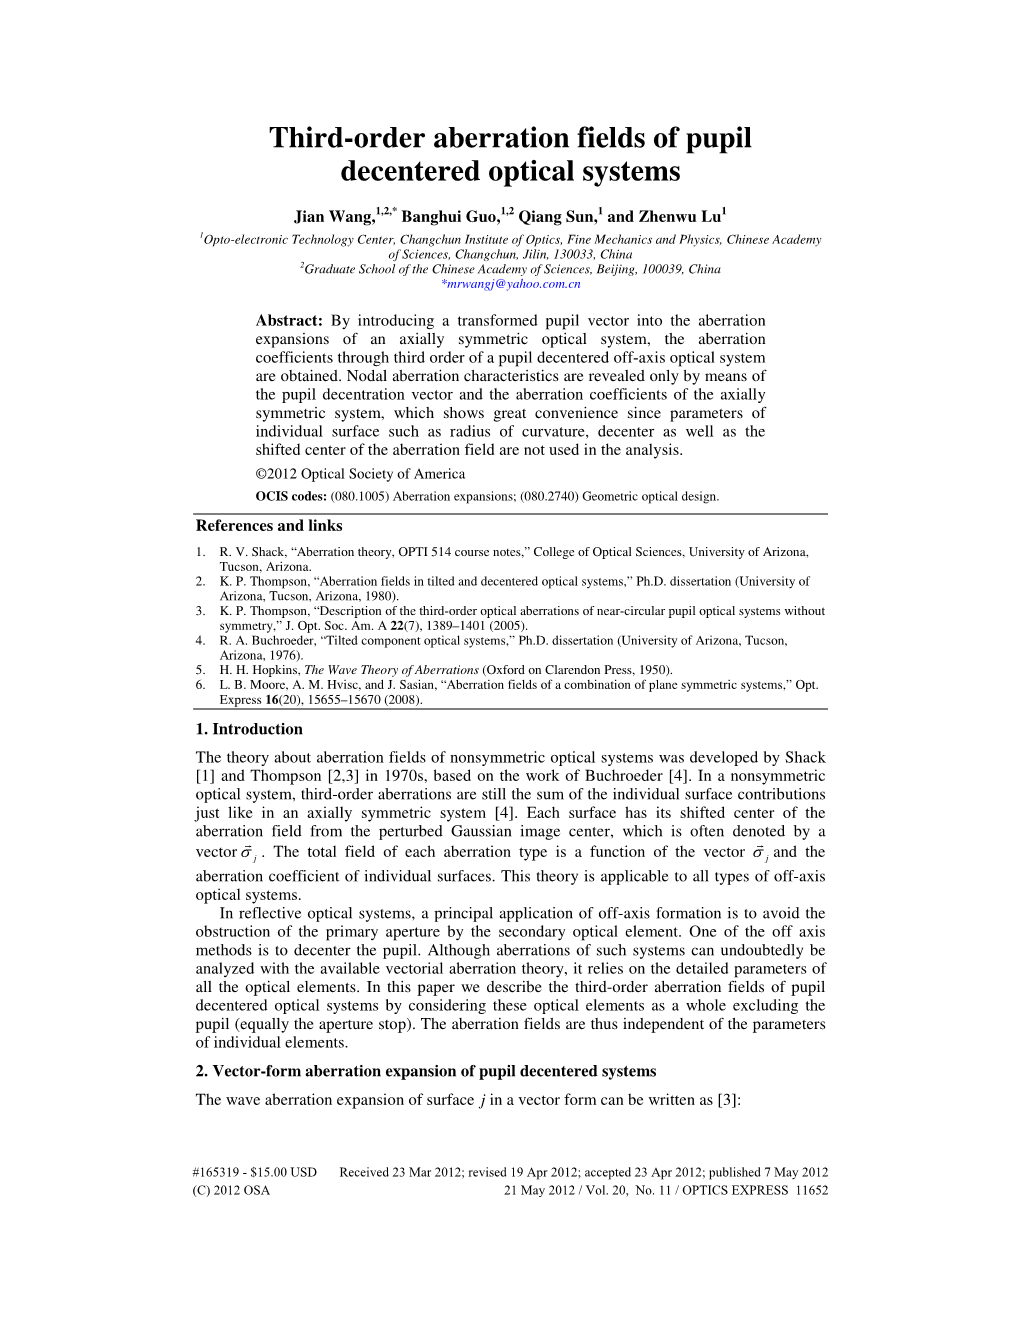 Third-Order Aberration Fields of Pupil Decentered Optical Systems